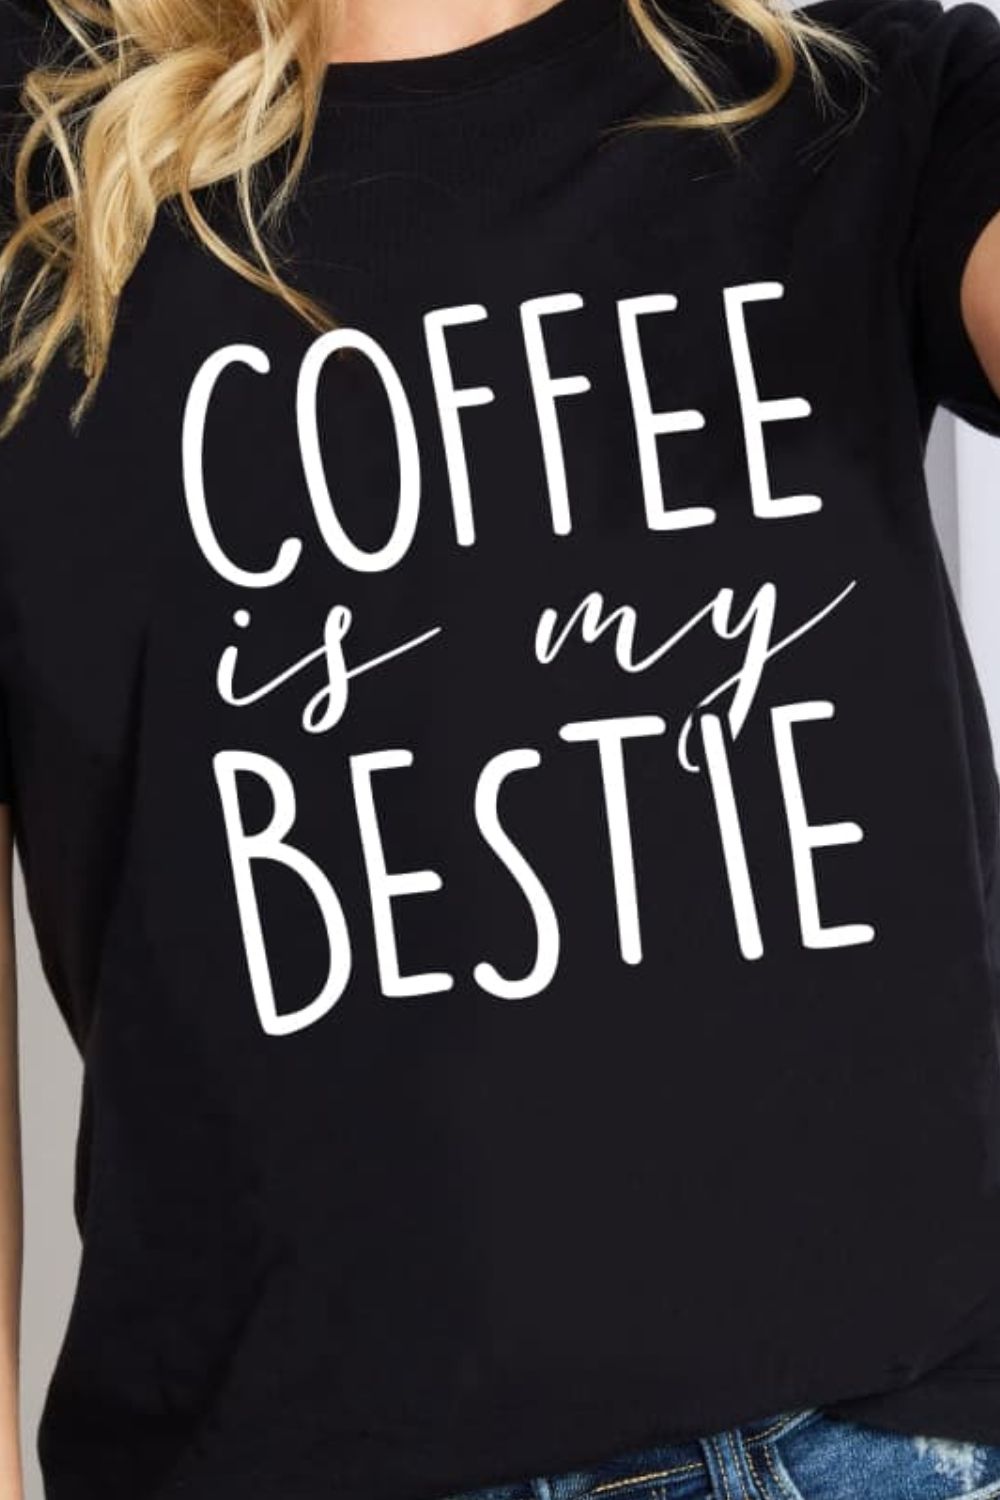 Funny COFFEE IS MY BESTIE Graphic 100% Cotton Tee Shirt (Plus Size Available)